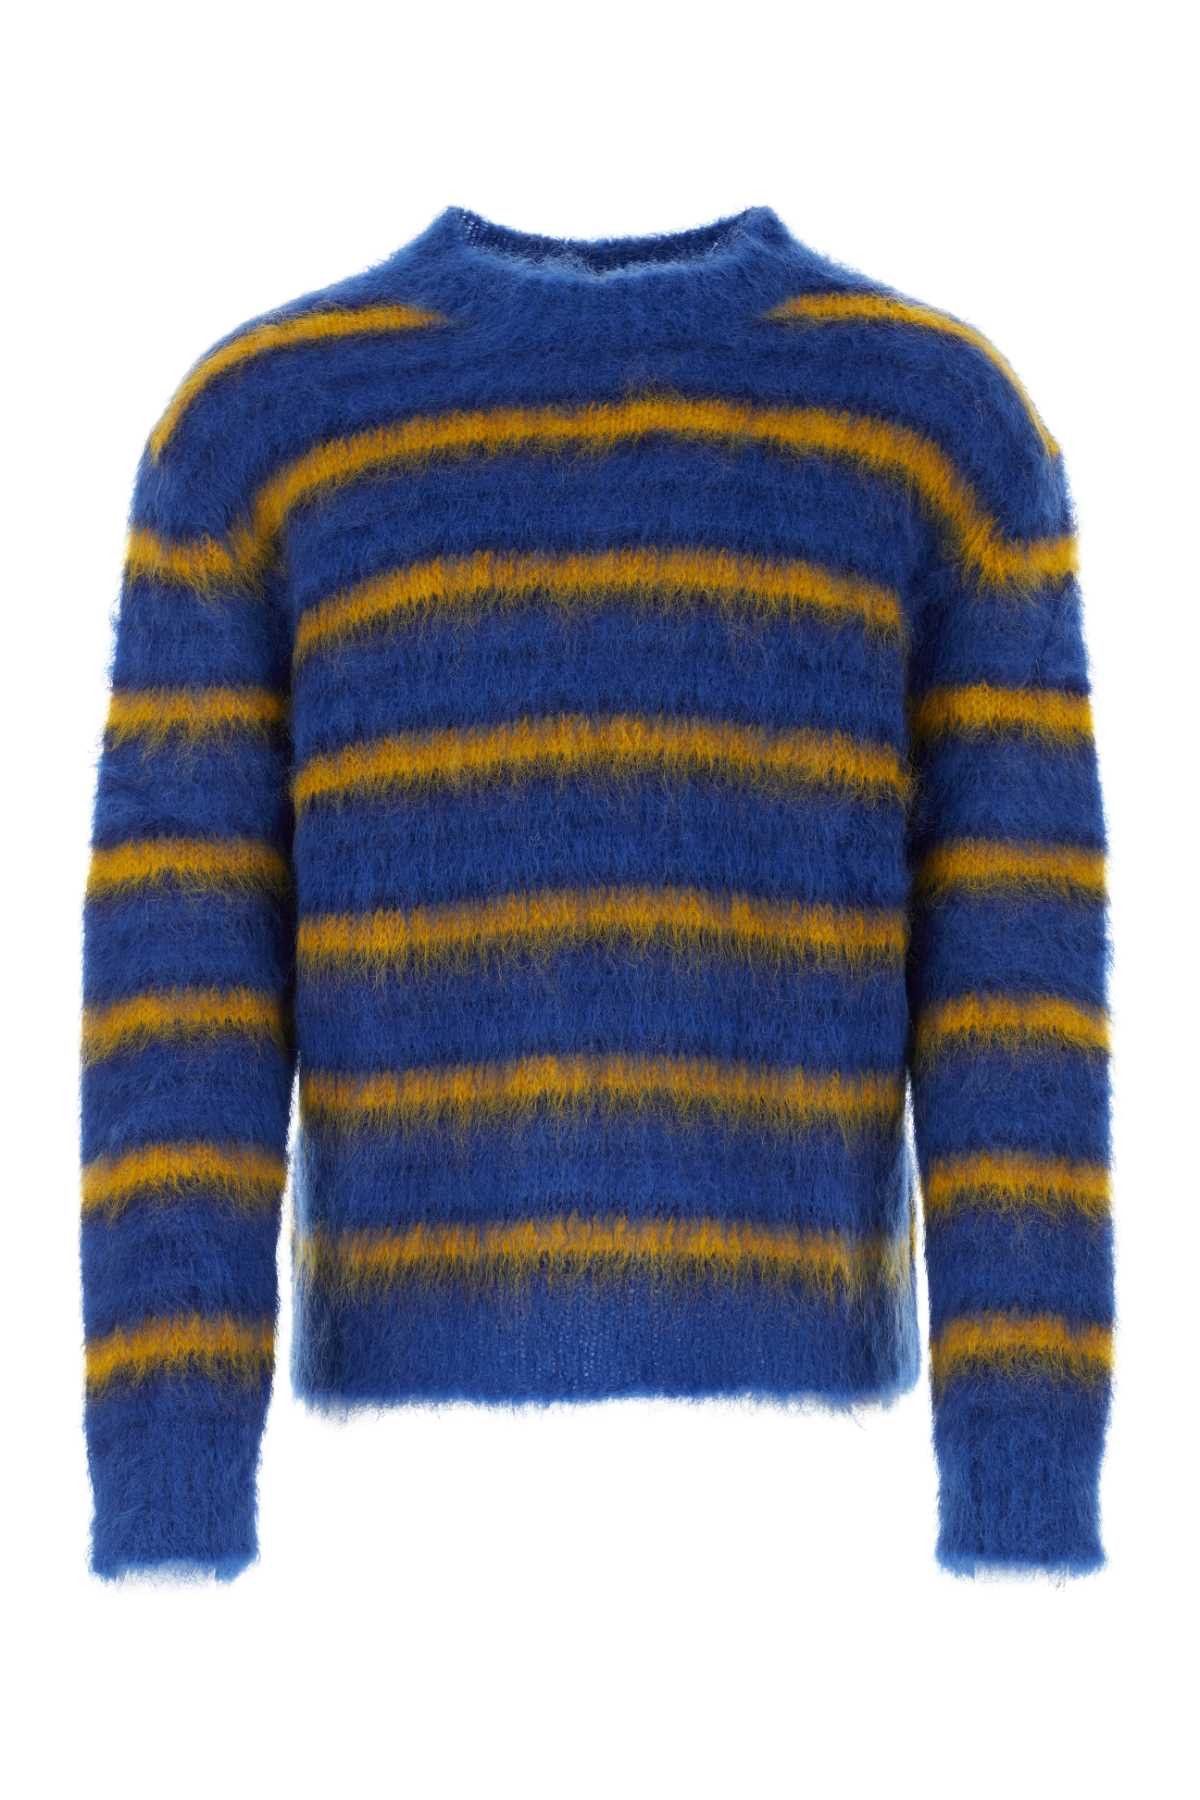 Marni Embroidered Mohair Blend Sweater | Grailed